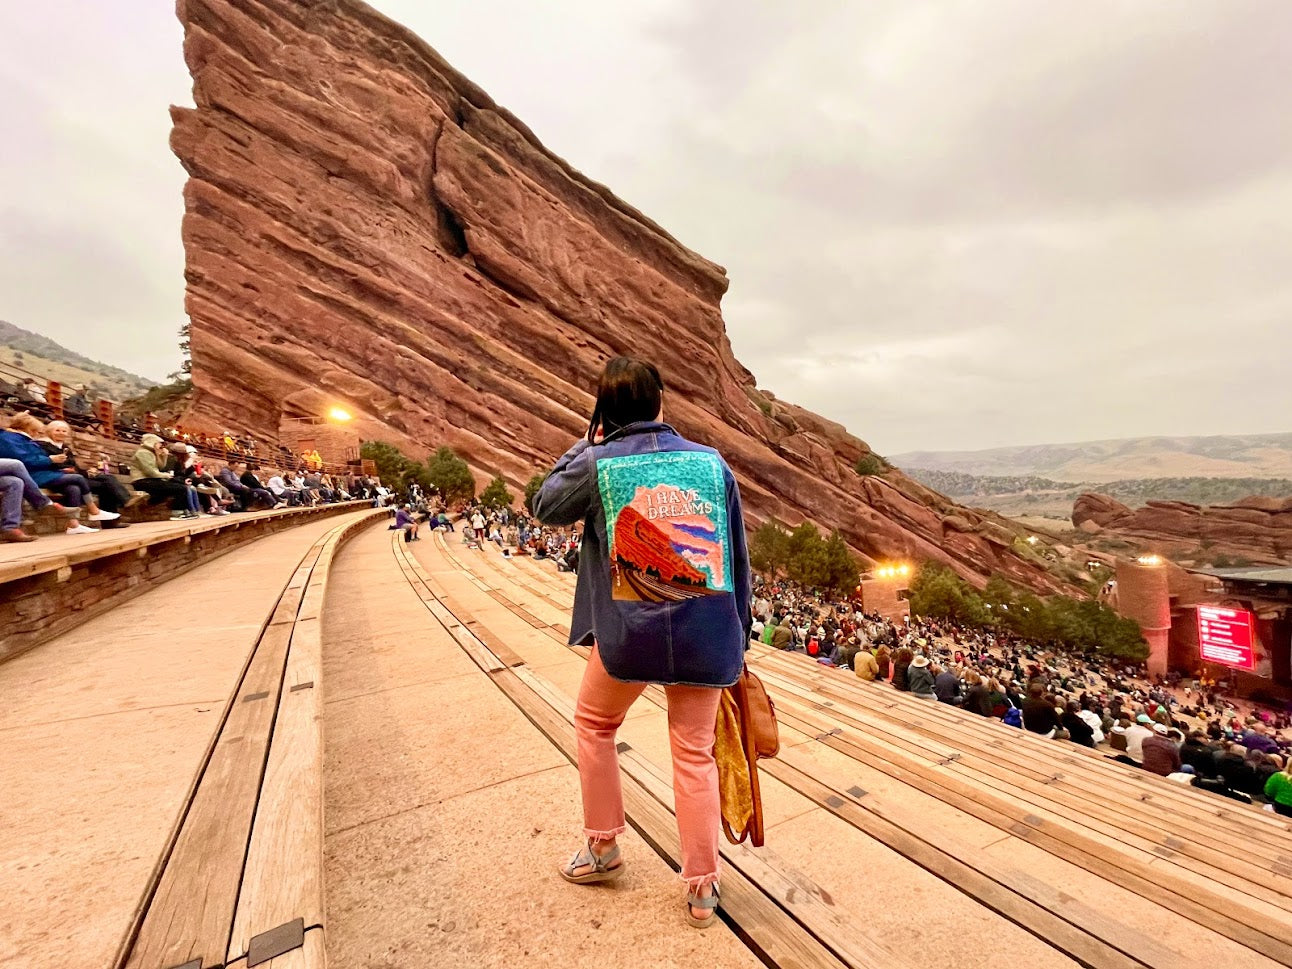 photo of a woman at red rocks stadium wearing a custom chainstitched denim jacket stitched with a sunset, red rocks, and text that says "I Have Dreams"